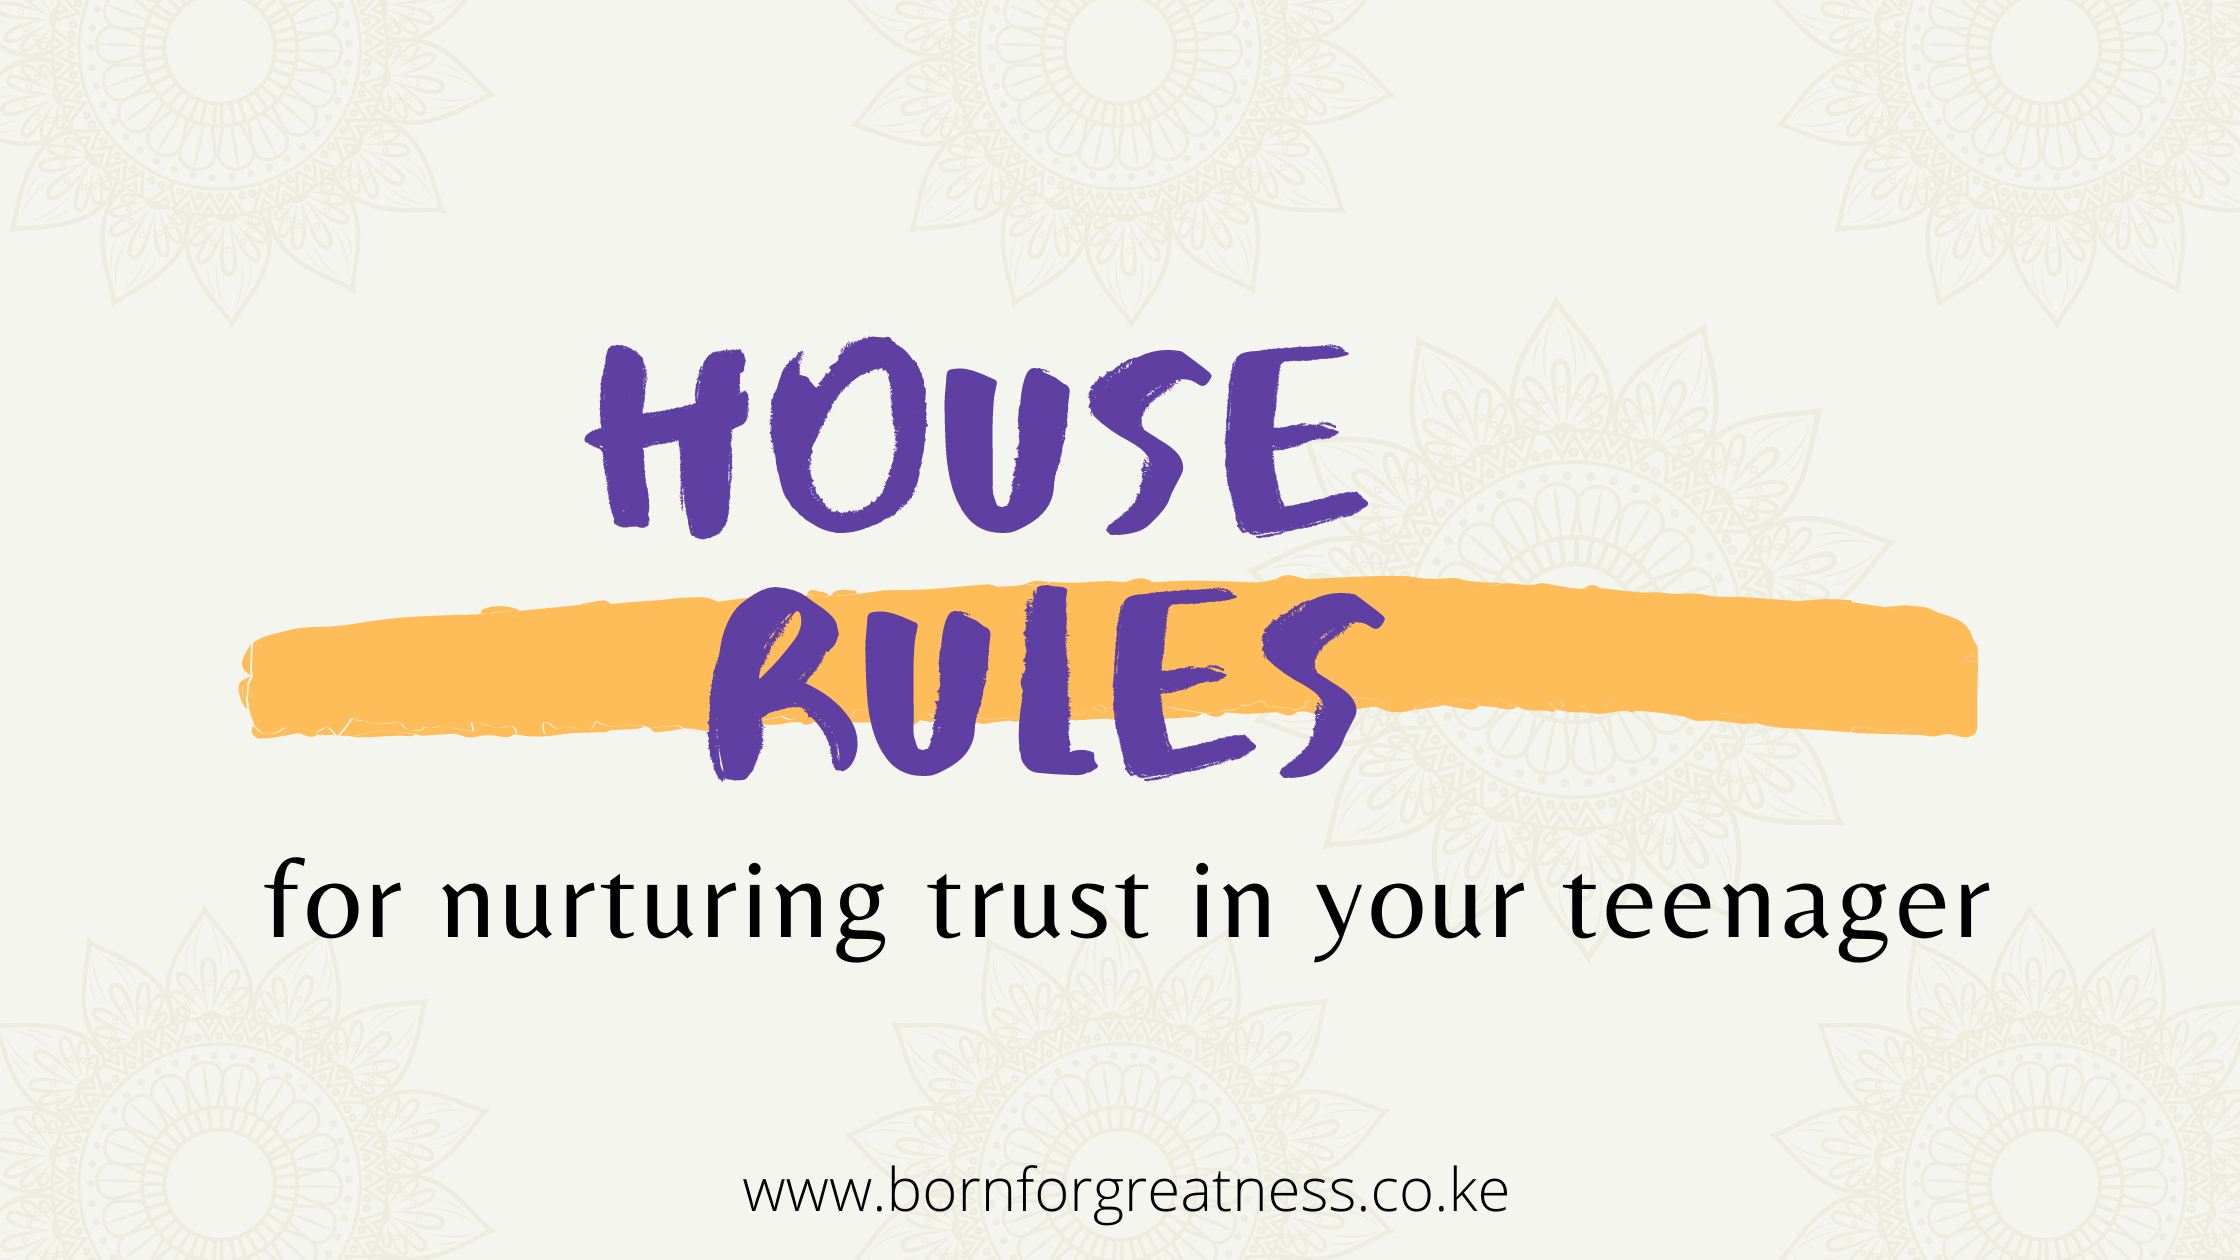 House rules for nurturing trust in your teenager